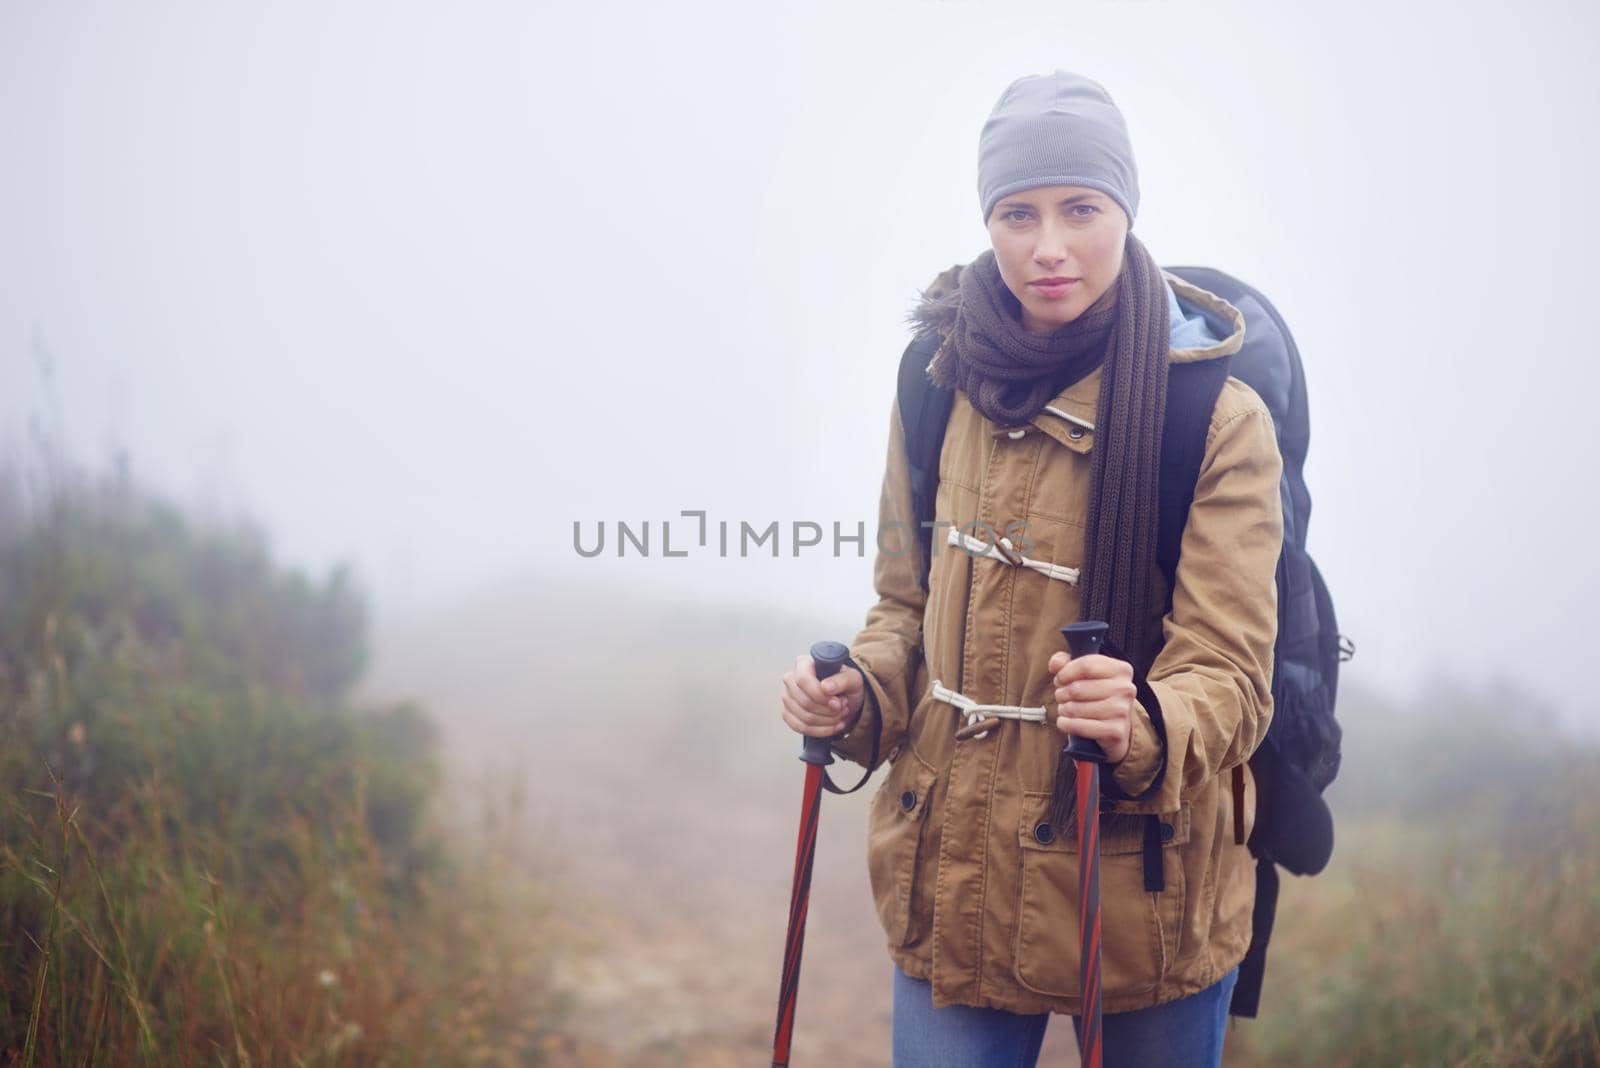 Portrait of a young woman hiking along a trail on an overcast day.